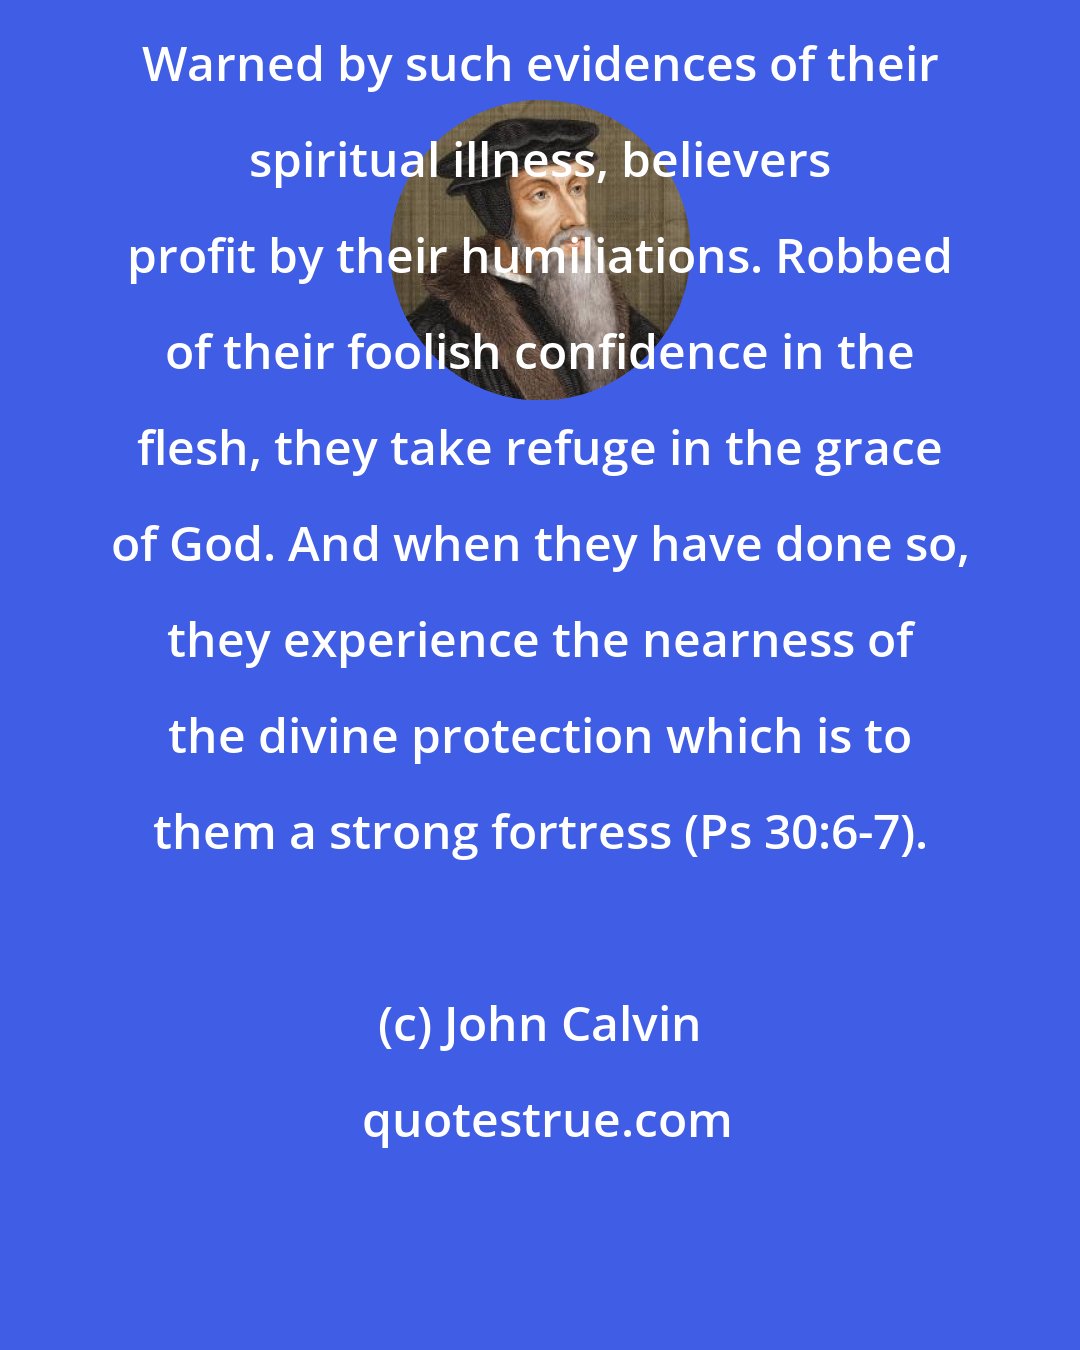 John Calvin: Warned by such evidences of their spiritual illness, believers profit by their humiliations. Robbed of their foolish confidence in the flesh, they take refuge in the grace of God. And when they have done so, they experience the nearness of the divine protection which is to them a strong fortress (Ps 30:6-7).